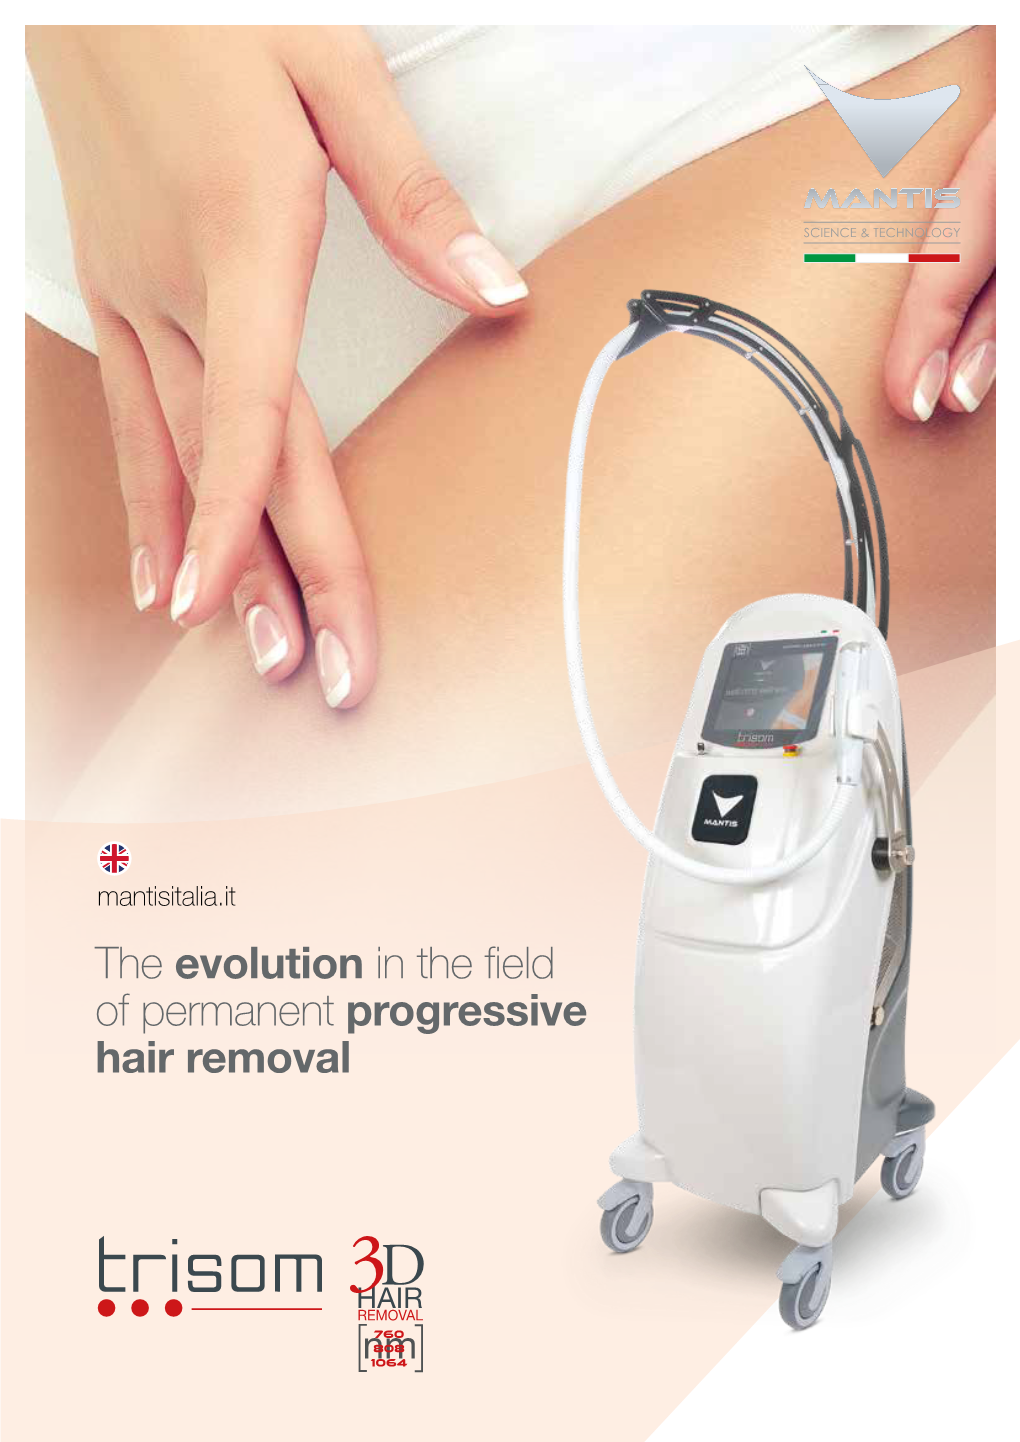 The Evolution in the Field of Permanent Progressive Hair Removal the Evolution in the Field of Permanent Progressive Hair Removal